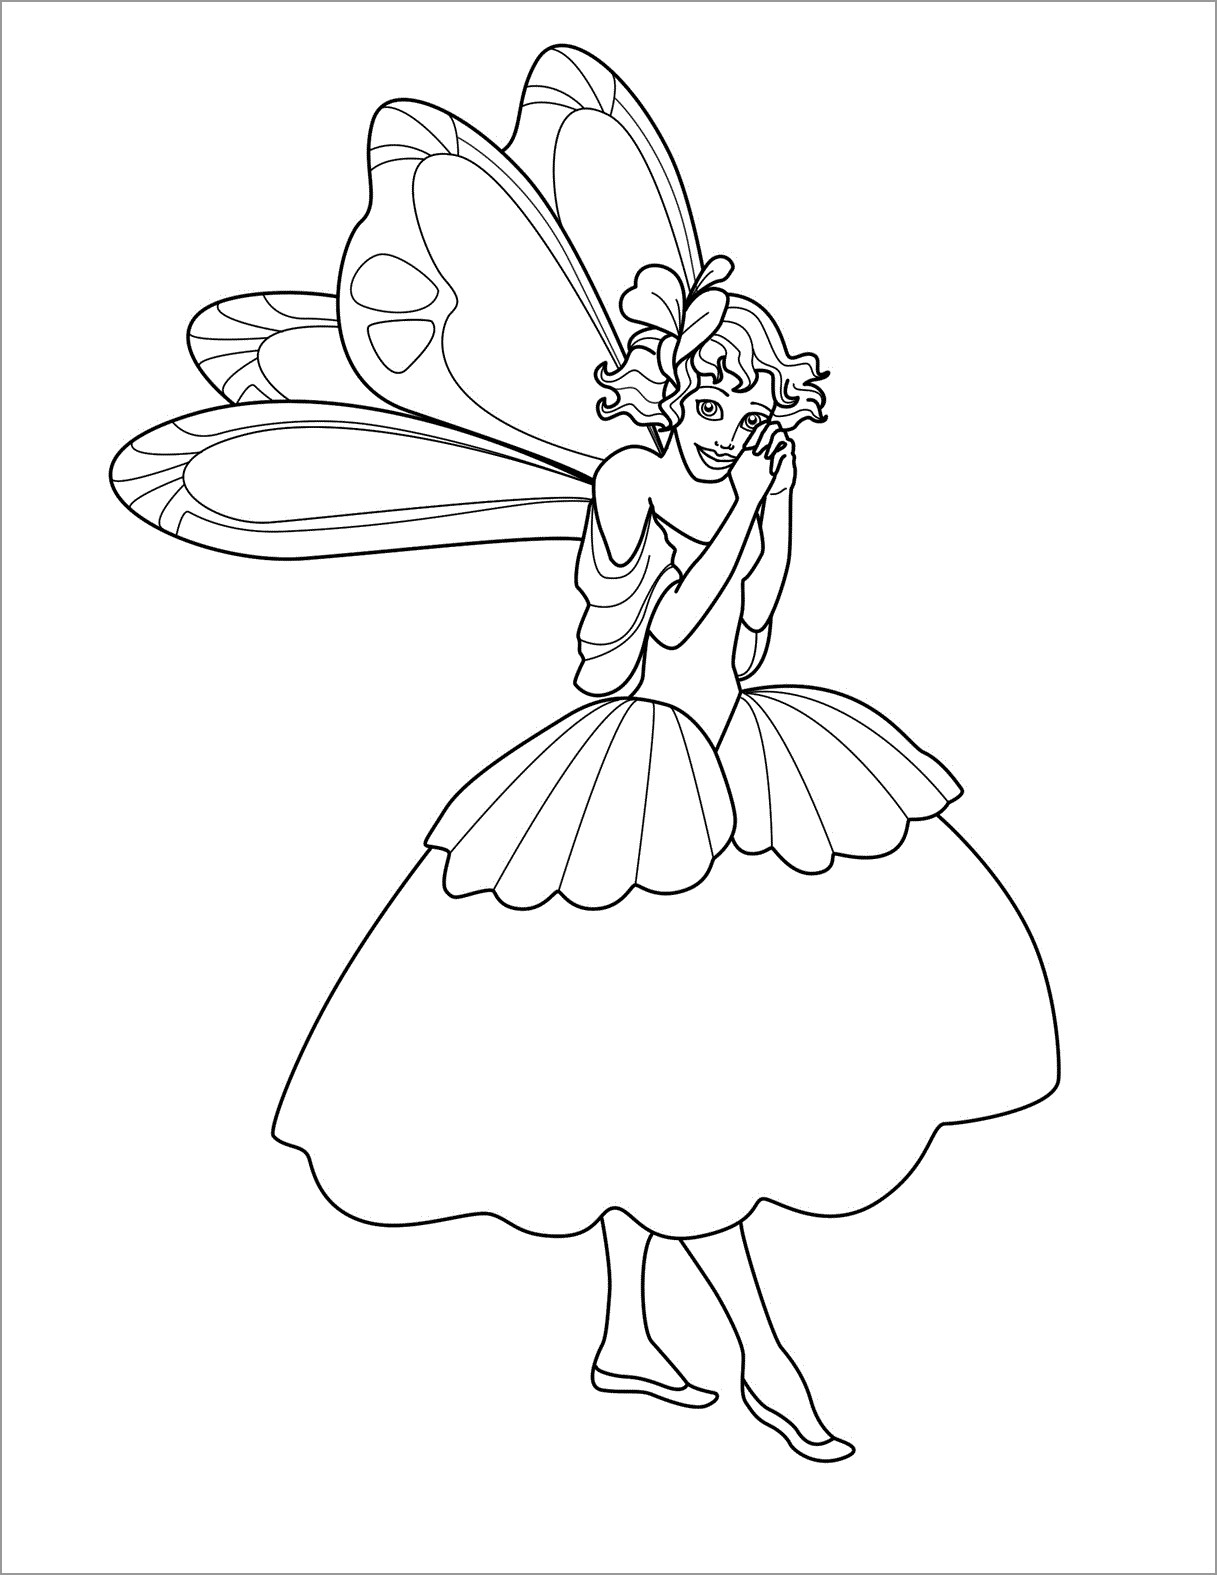 Startling Fairy Coloring Page